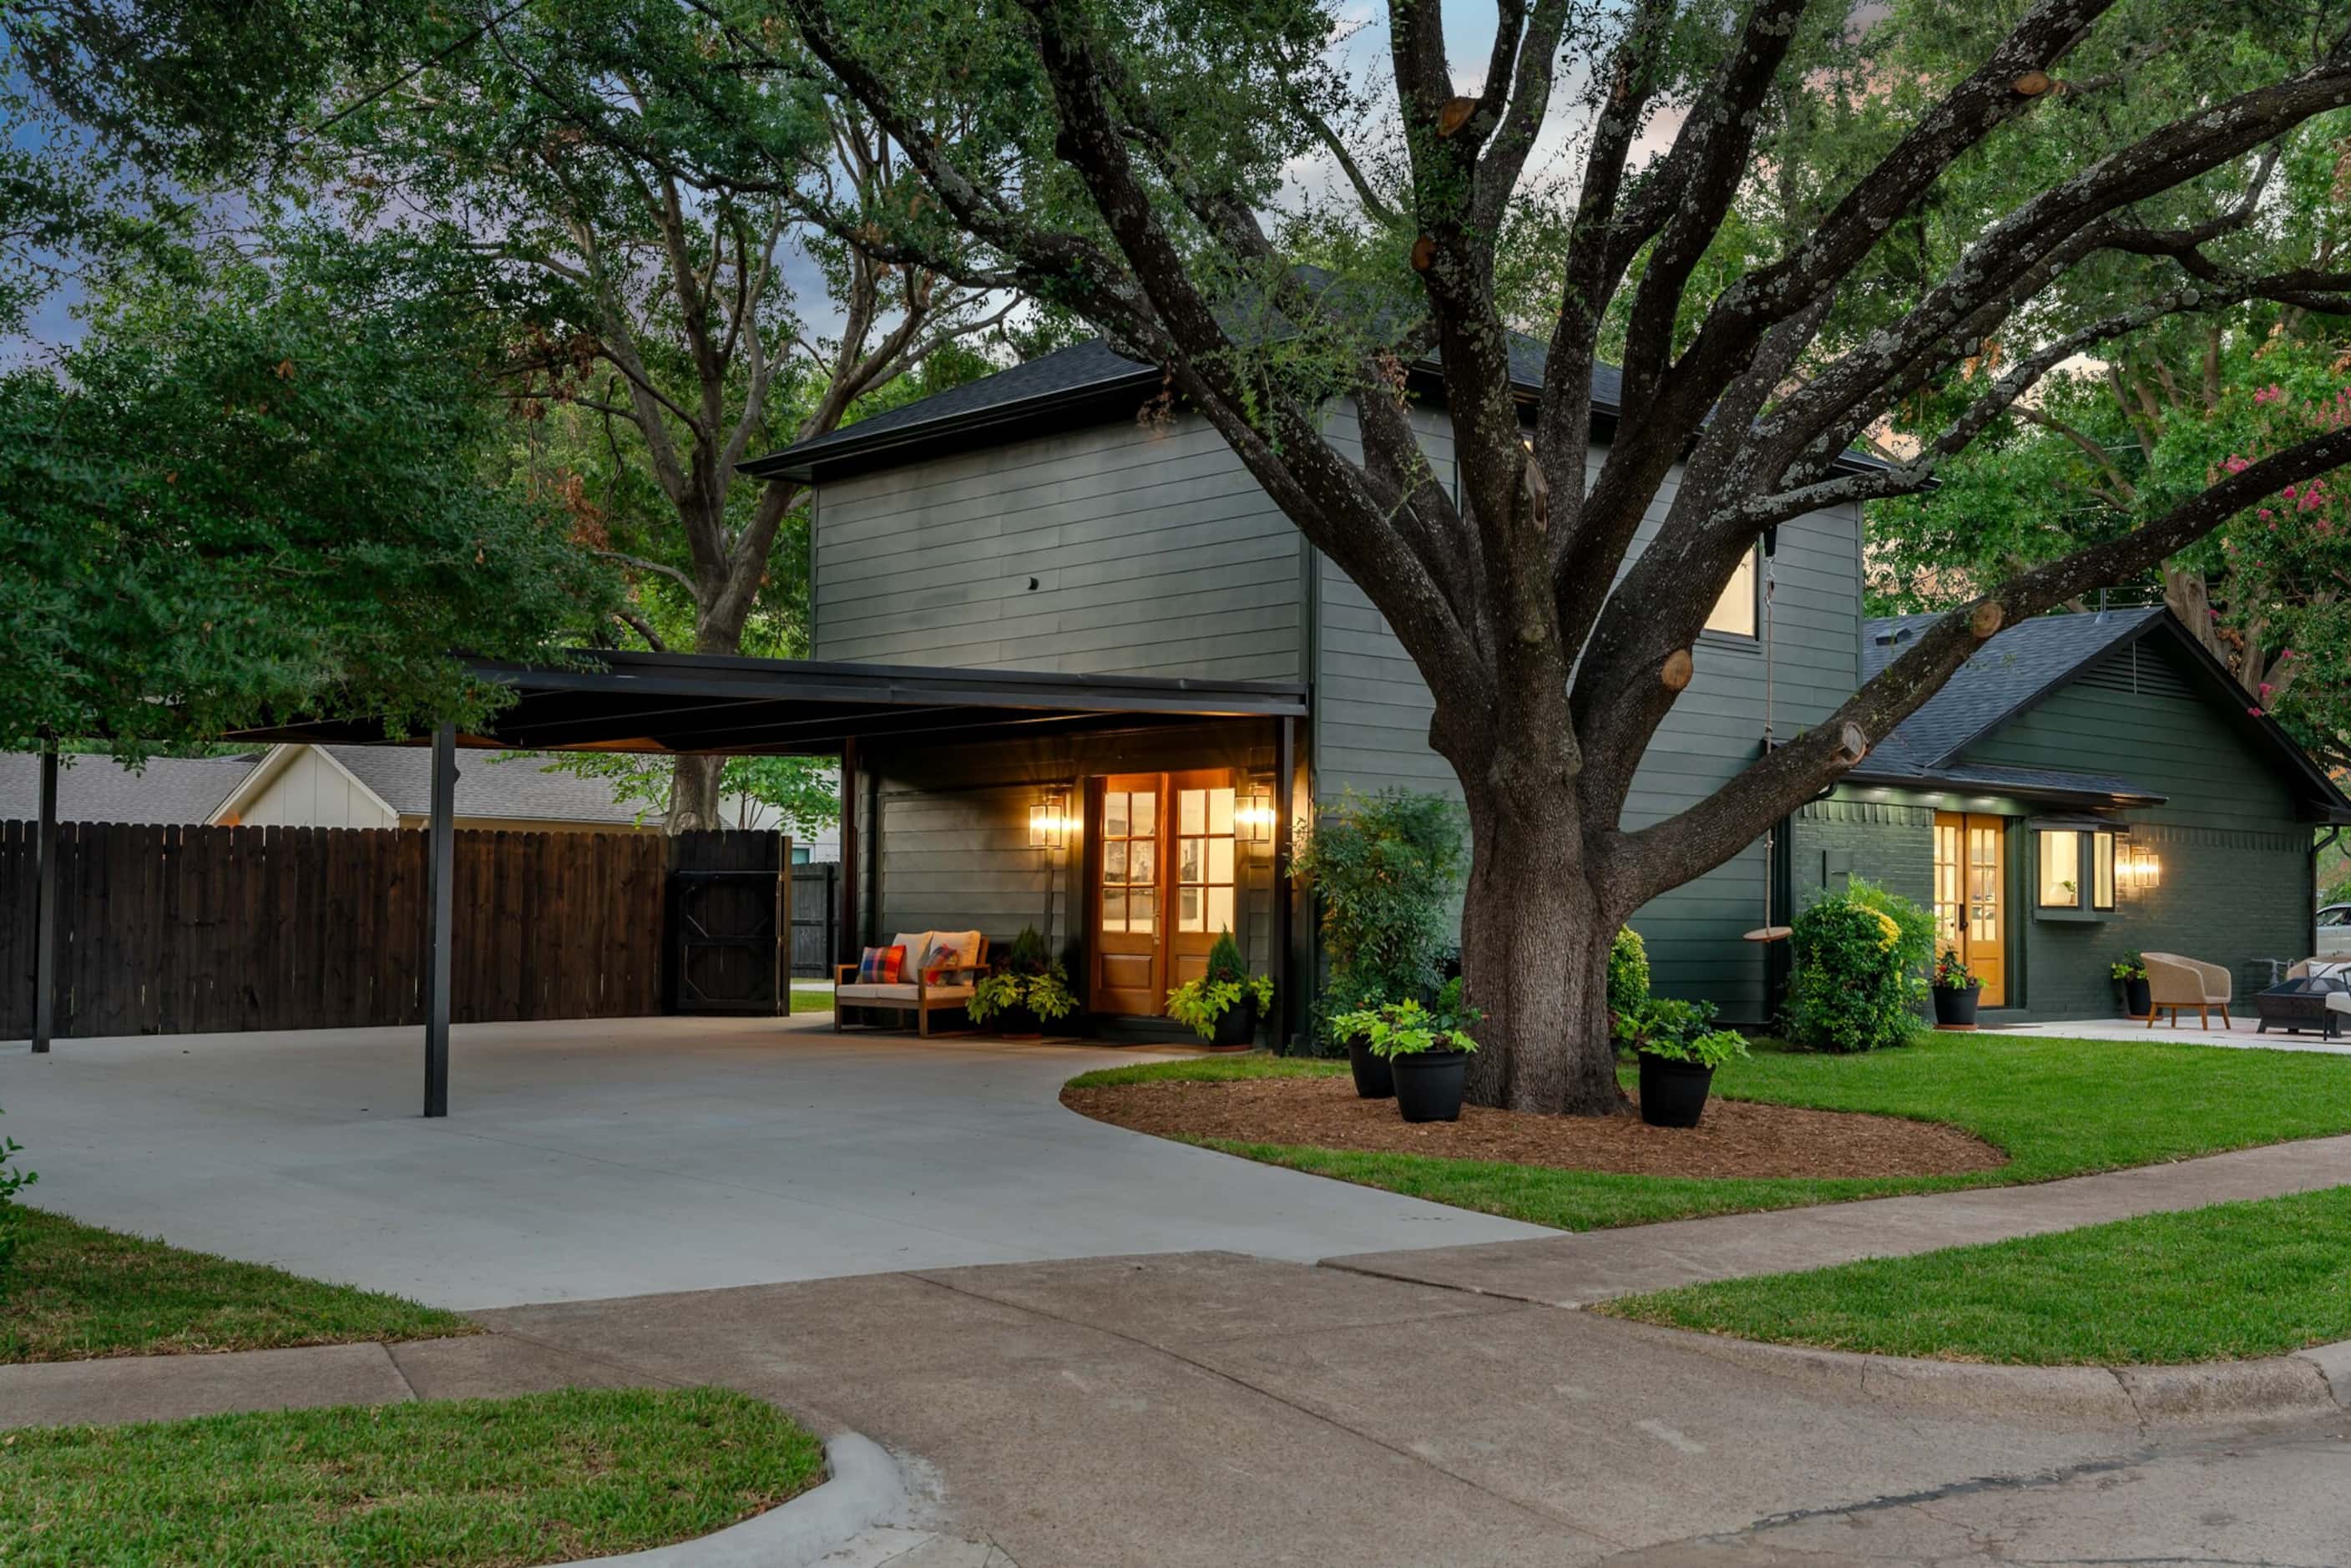 House with dark green exterior, covered carport, large tree in side yard